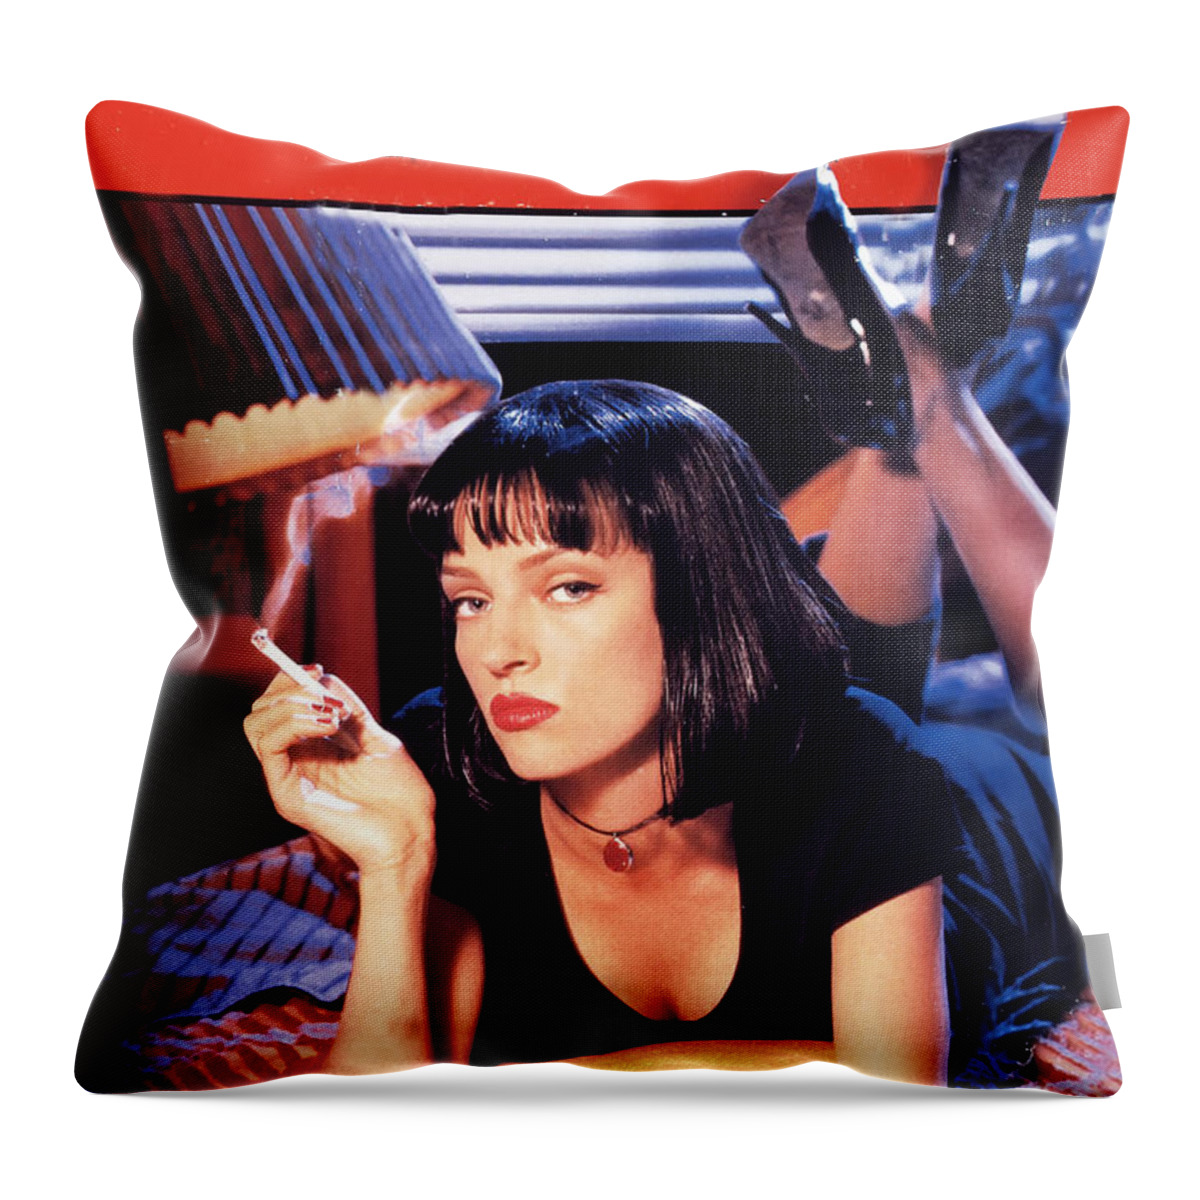 Pulp Fiction Throw Pillow featuring the digital art Pulp Fiction by Georgia Fowler